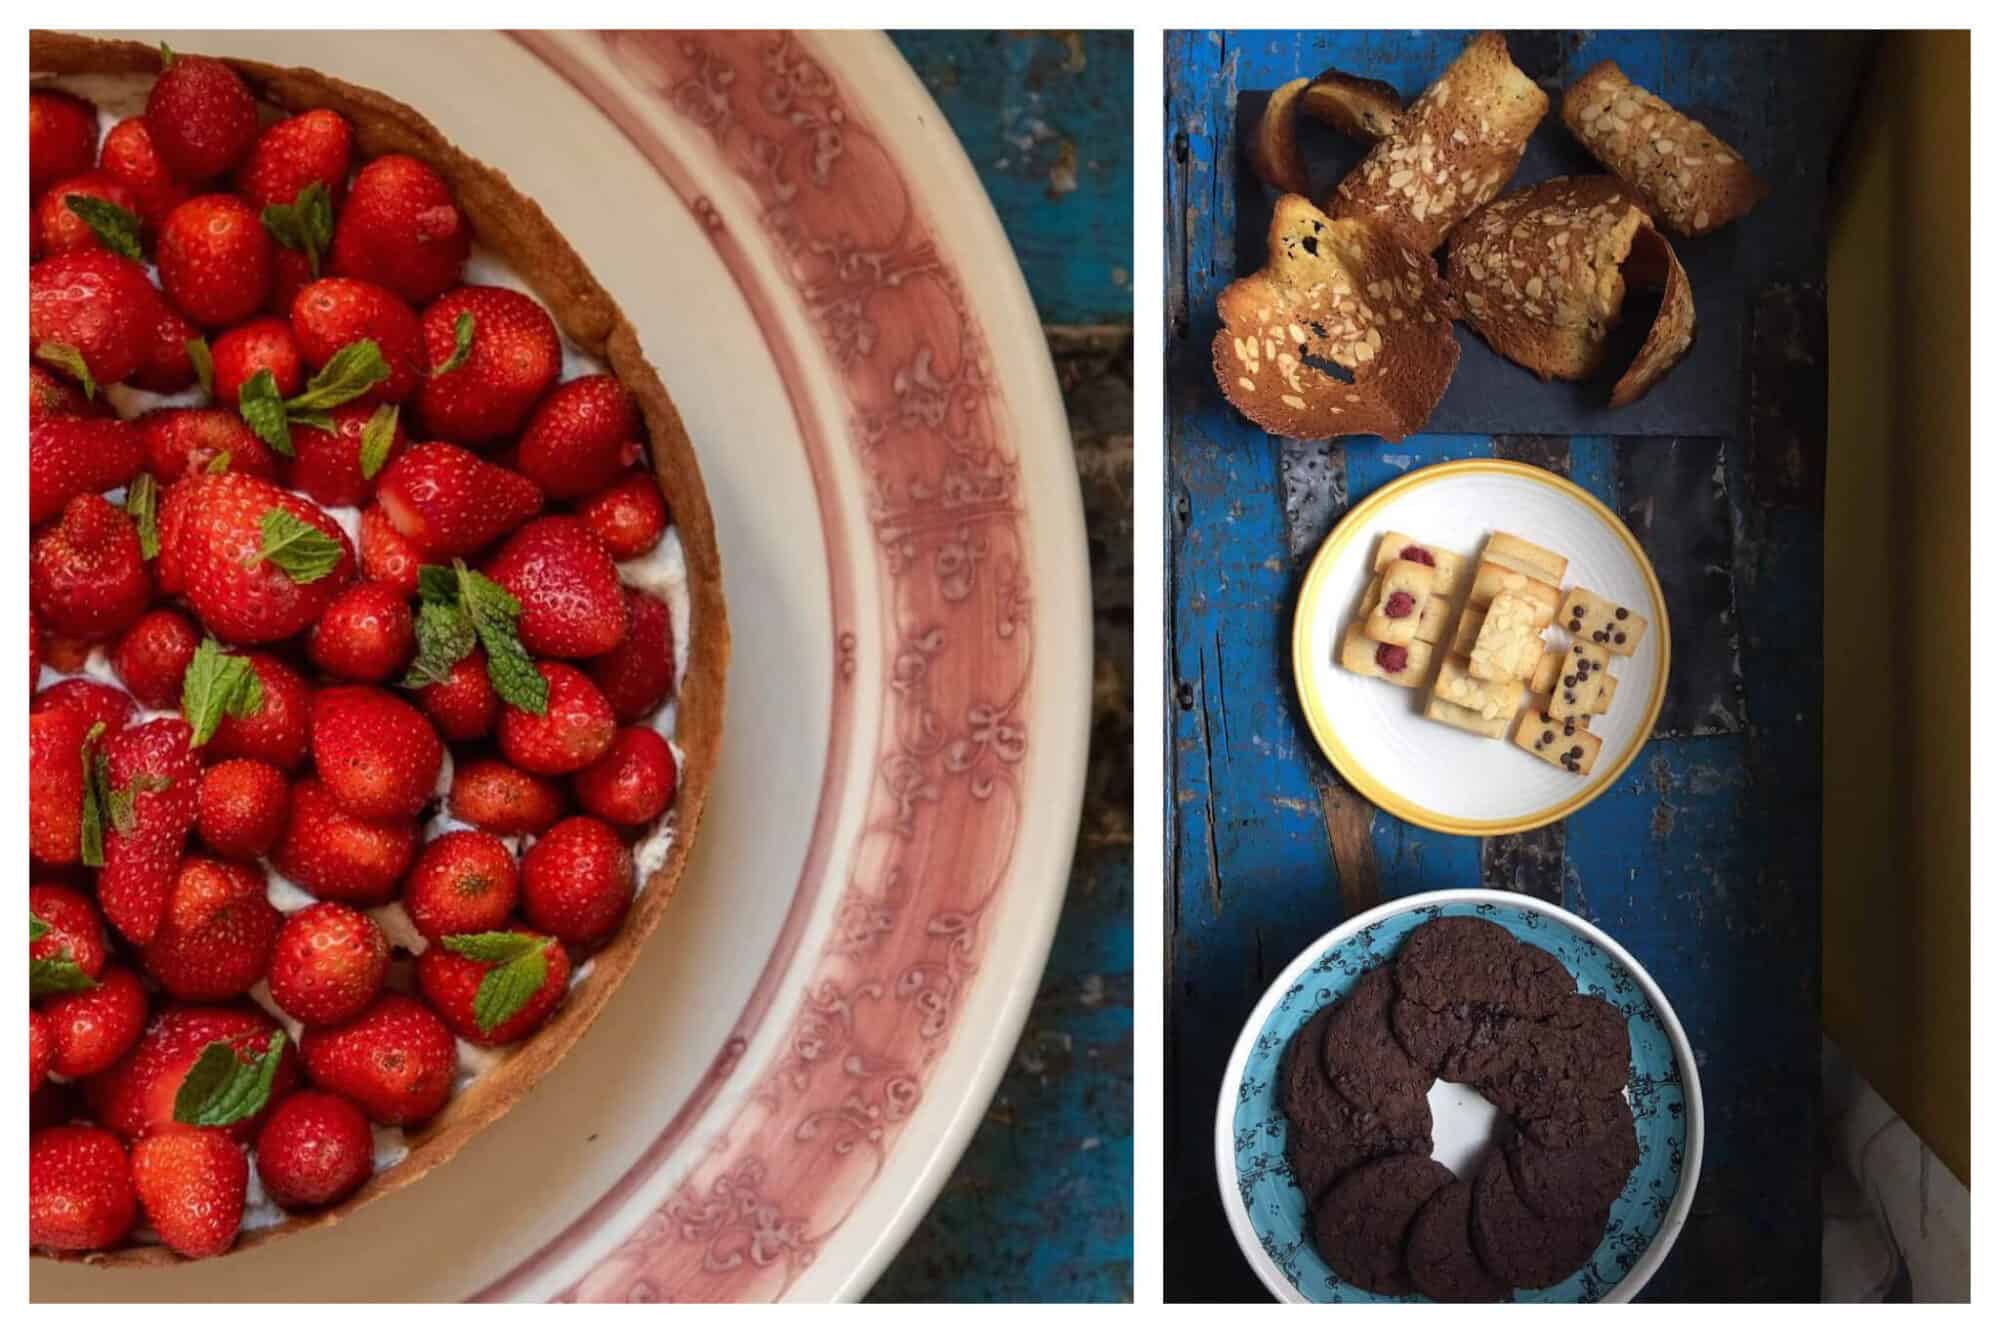 Left: An overhead shot of a bright red strawberry tart sitting atop a large white and red plate, Right: An overhead shot of various desserts and pastries, including chocolte cookies and almond pastries. 